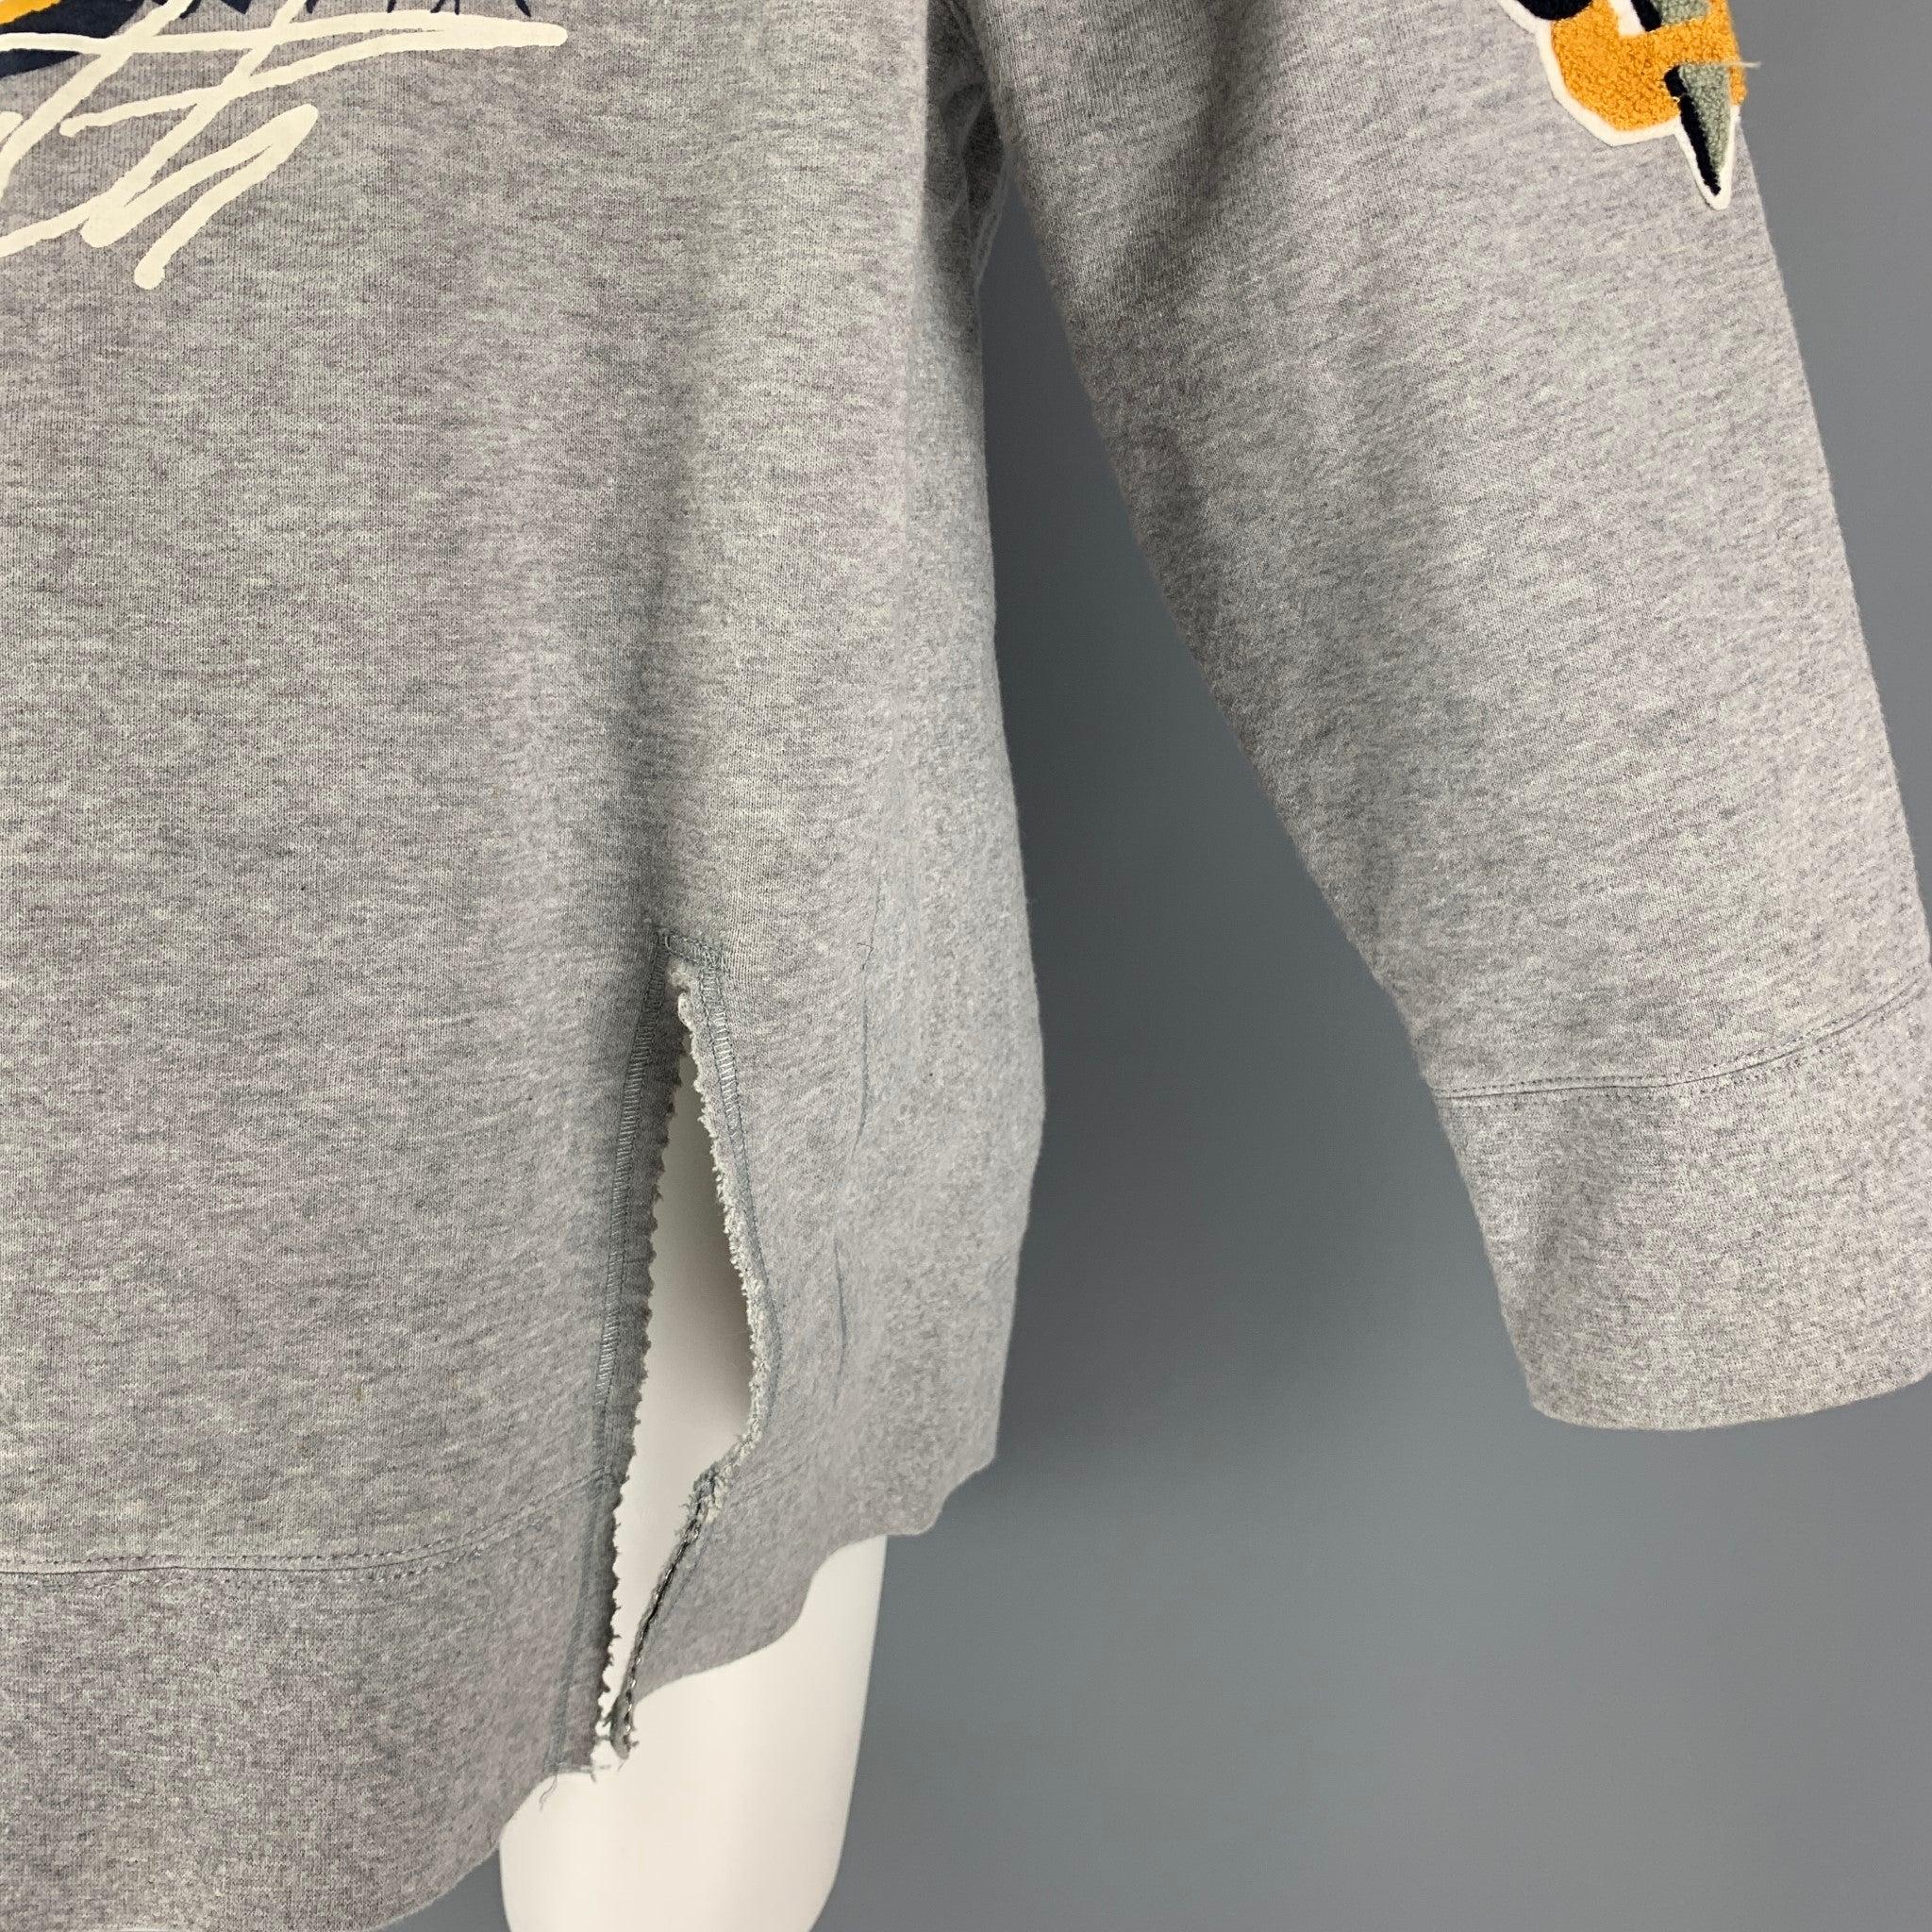 UNDERCOVER sweatshirt comes in a grey cotton featuring a front & back graphic design, oversized fit, front slit, shoulder zipper closure, and a crew-neck. Made in Japan. Very Good
Pre-Owned Condition. 

Marked:   1 

Measurements: 
 
Shoulder: 24